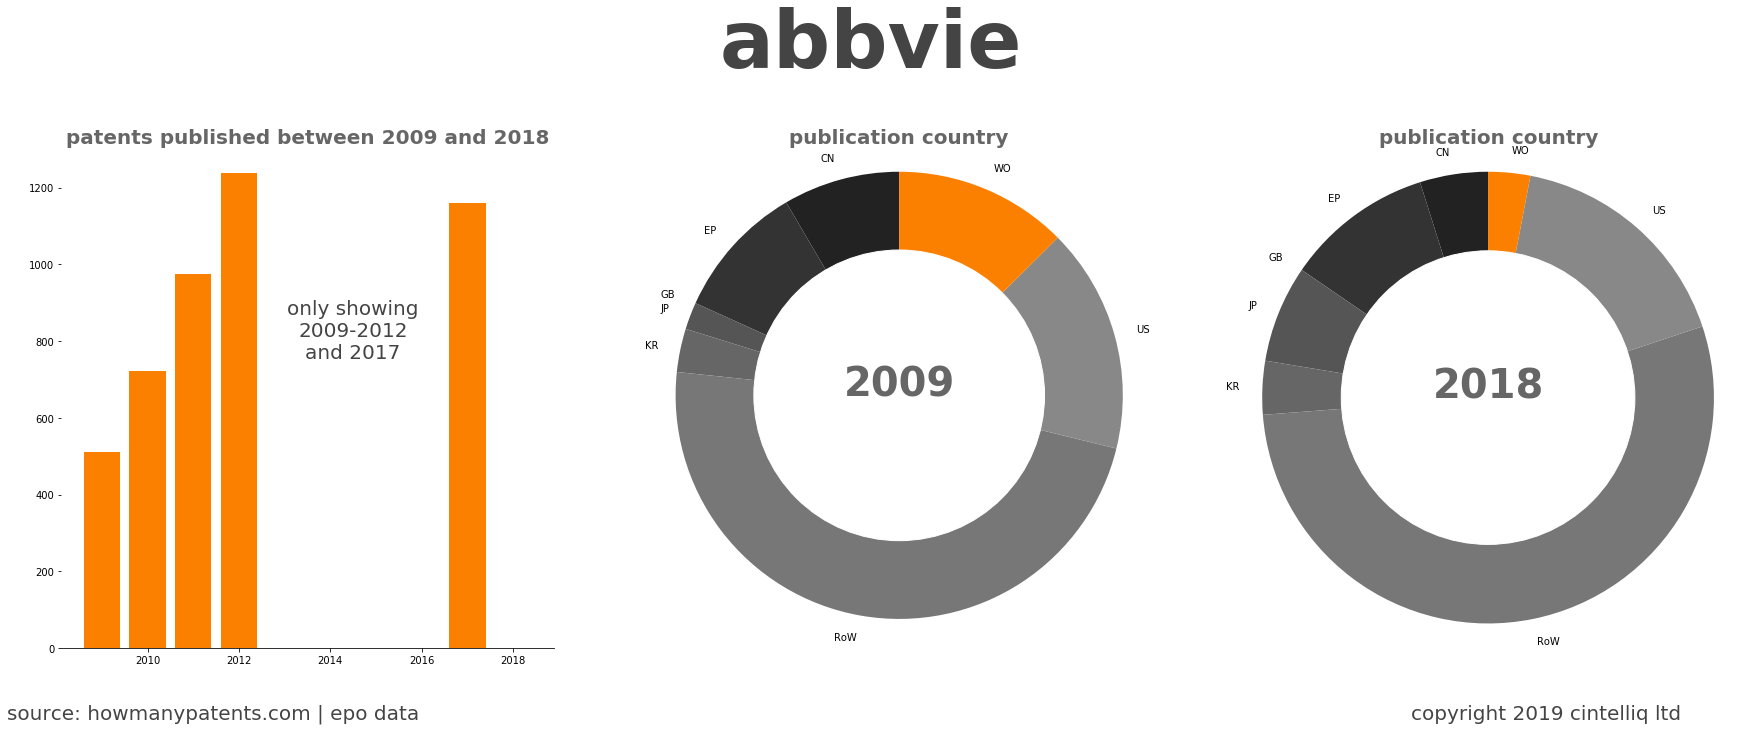 summary of patents for Abbvie